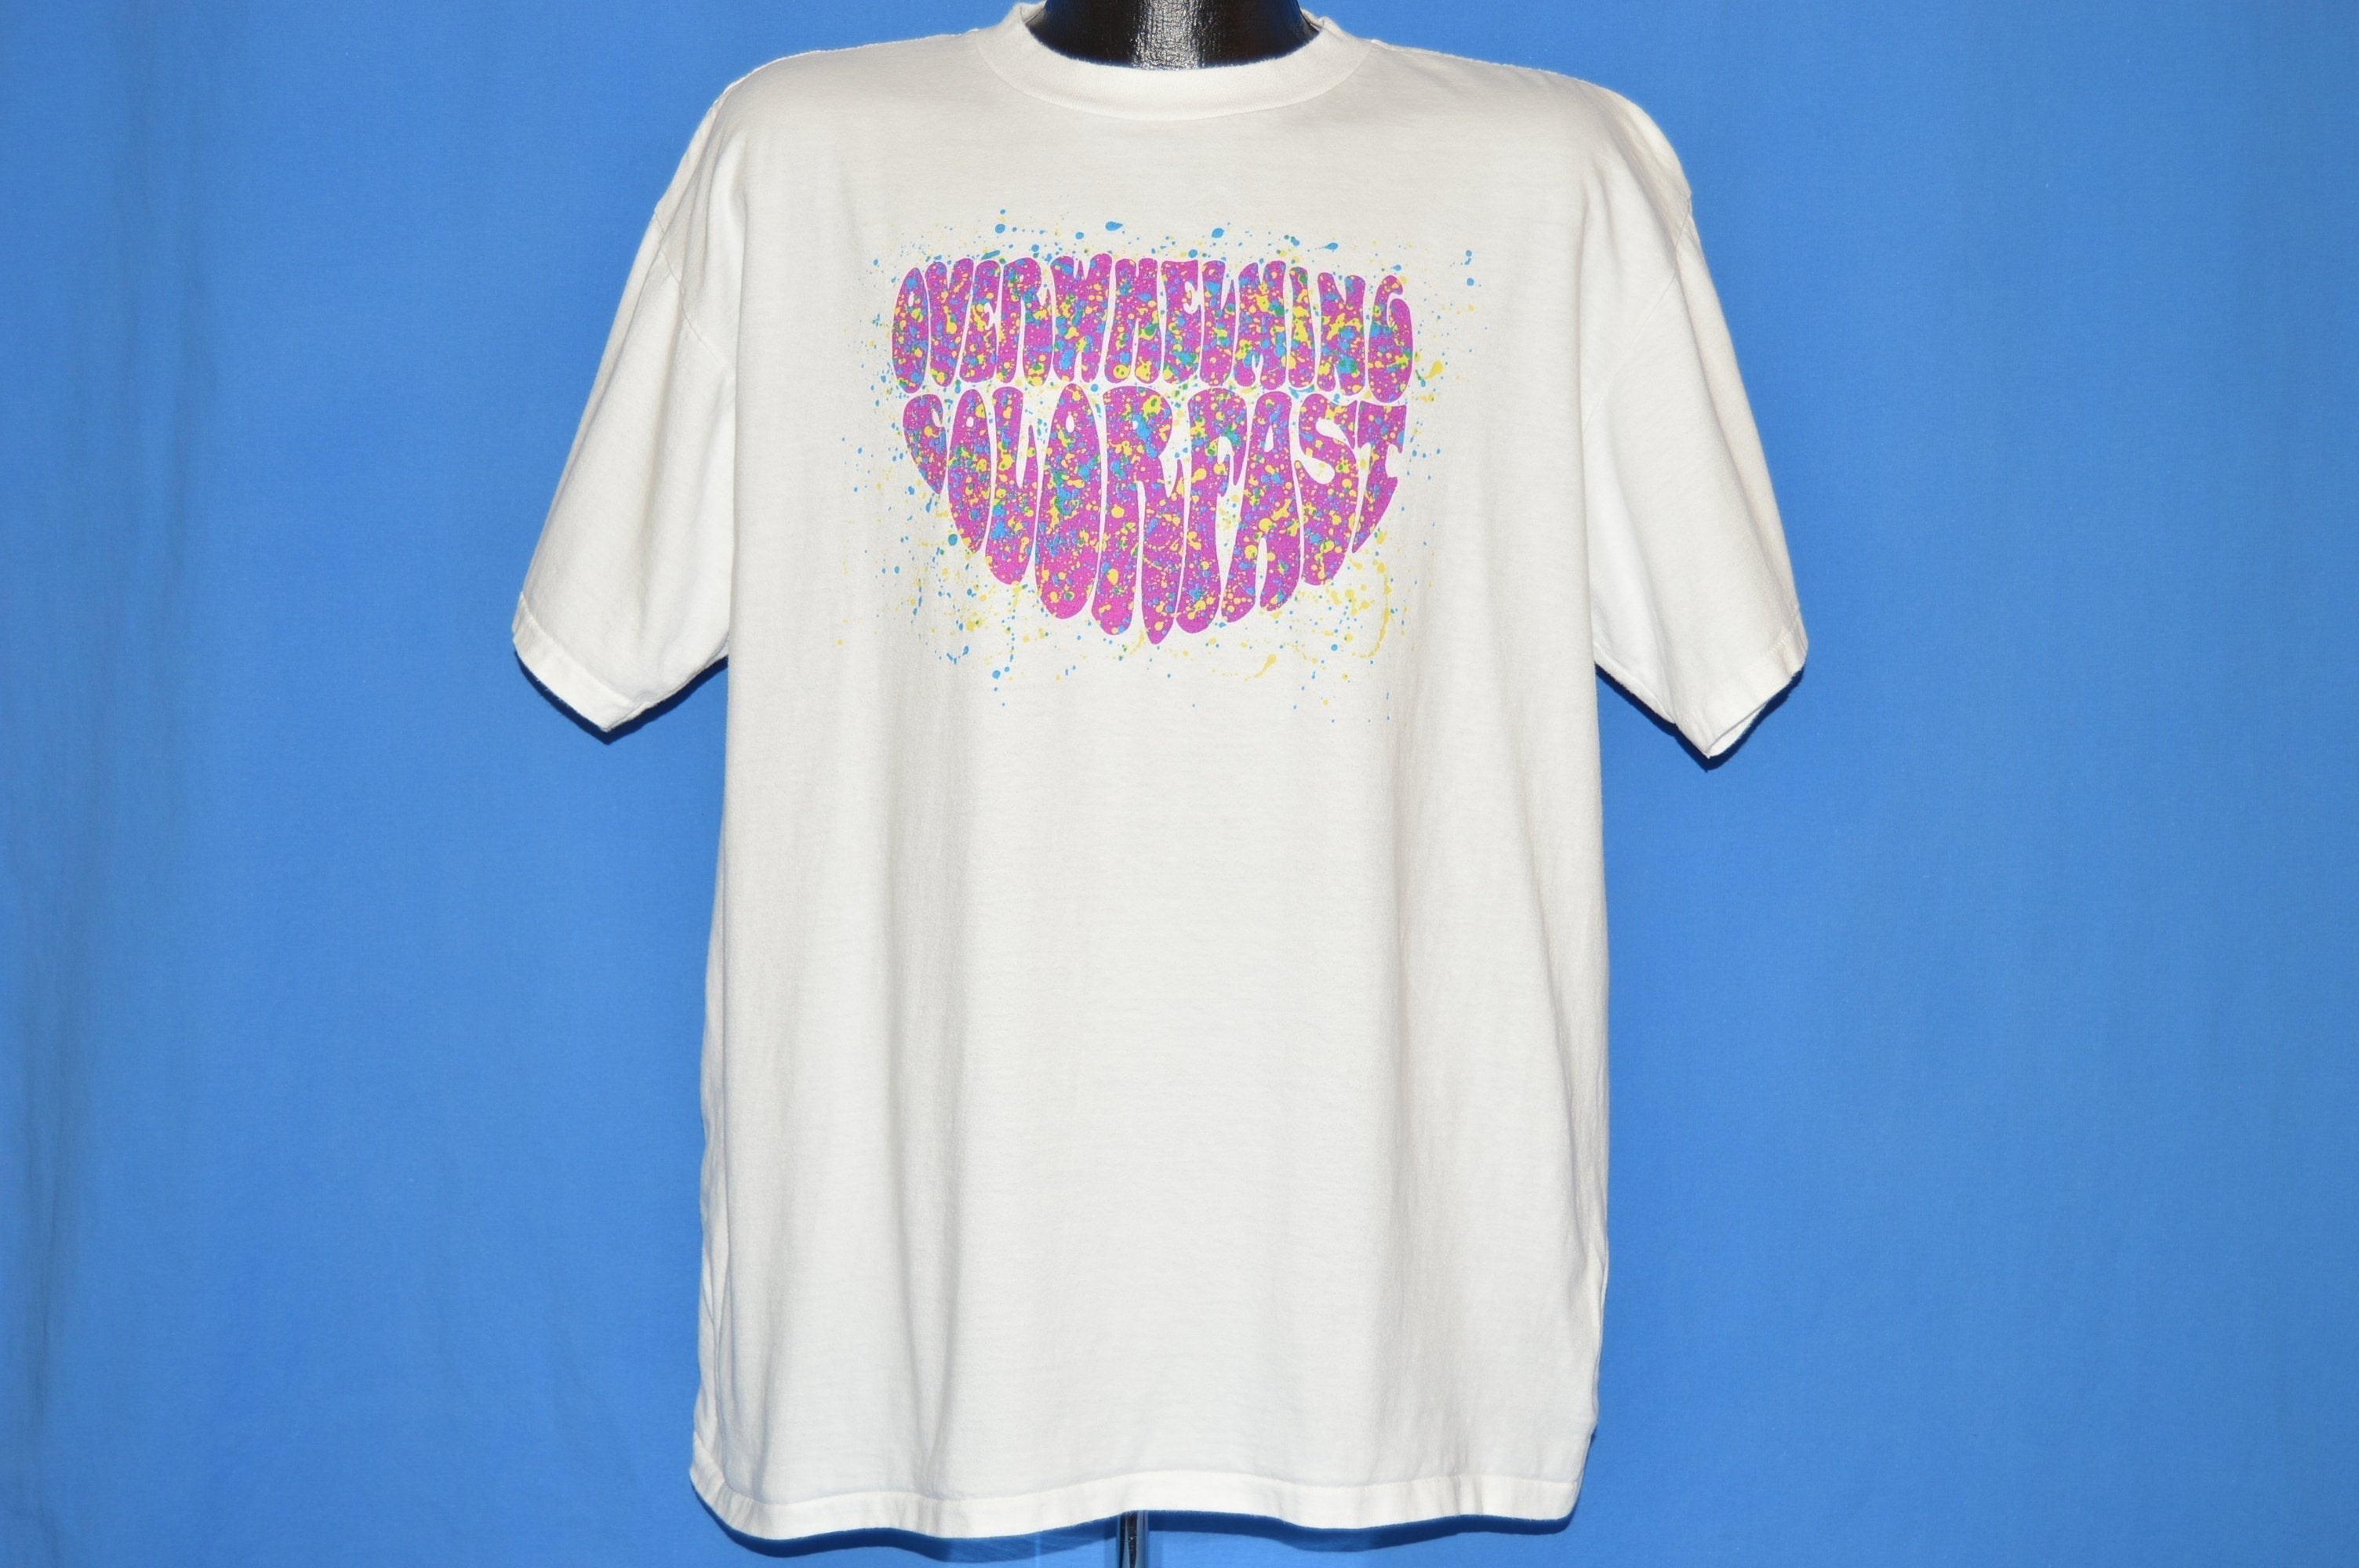 90s Overwhelming Colorfast 1991 Album t-shirt Extra Large - The ...